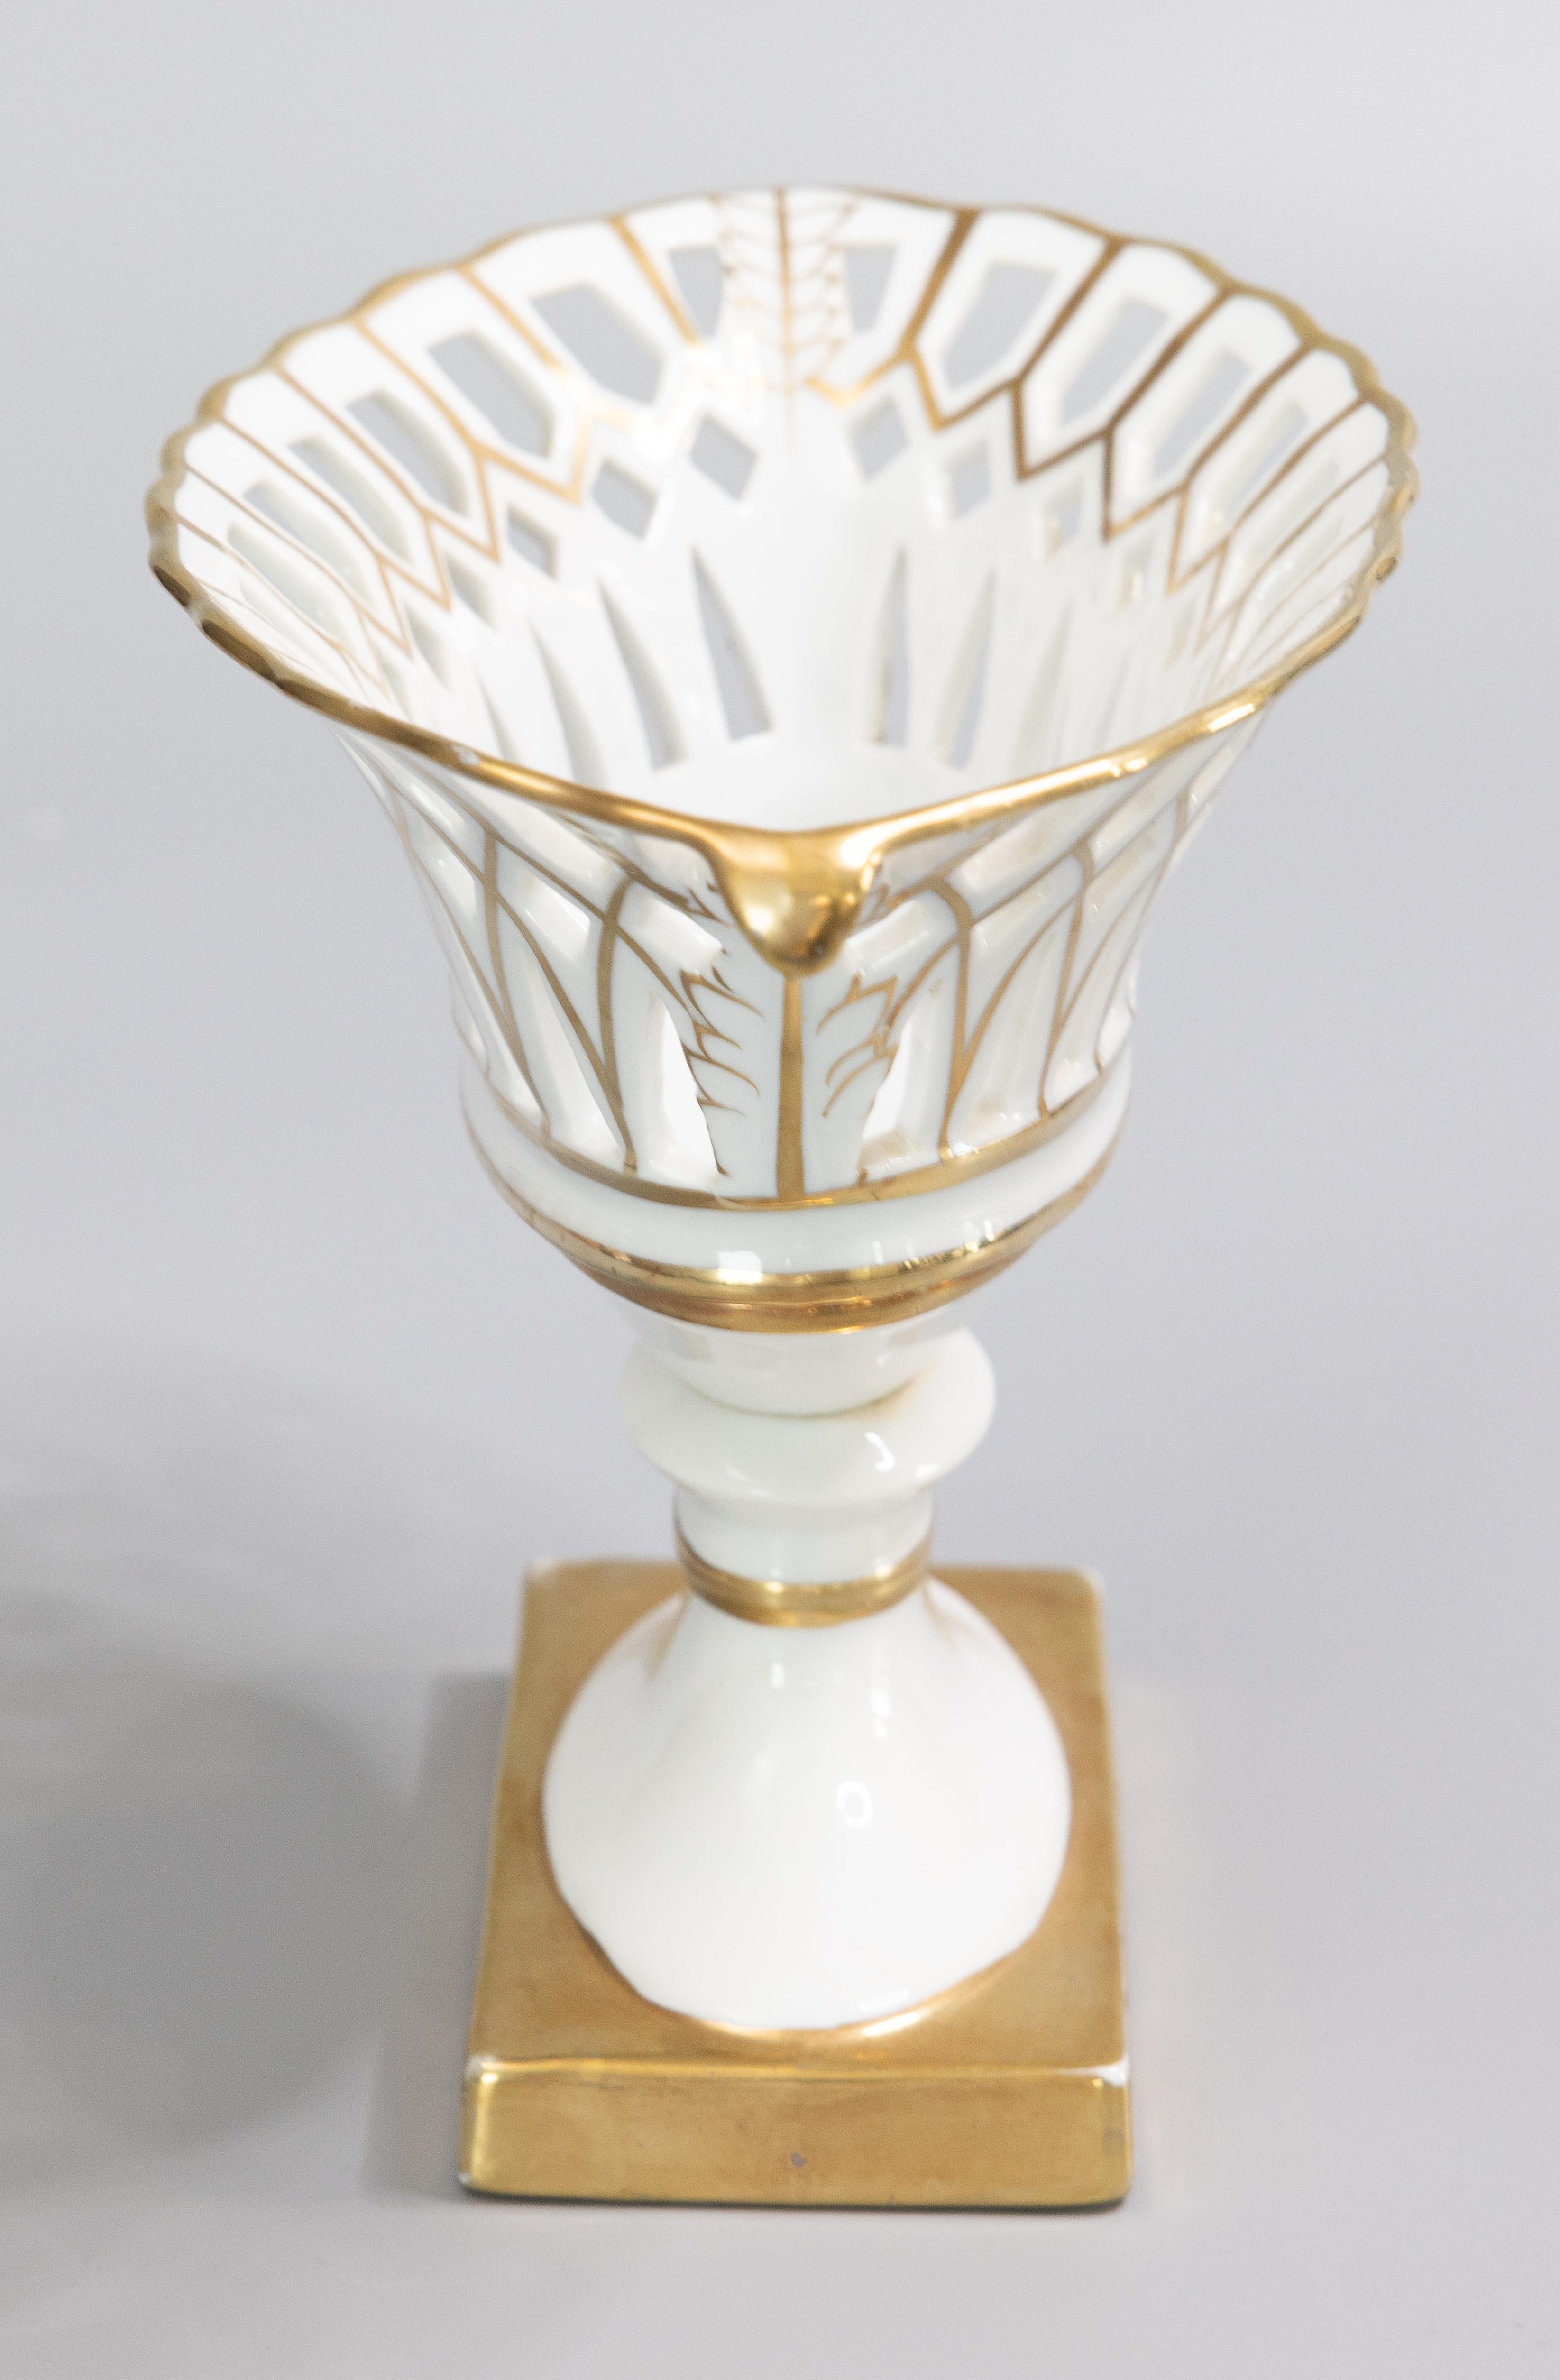 20th Century French Old Paris Gilt Porcelain Reticulated Compote, circa 1950 For Sale